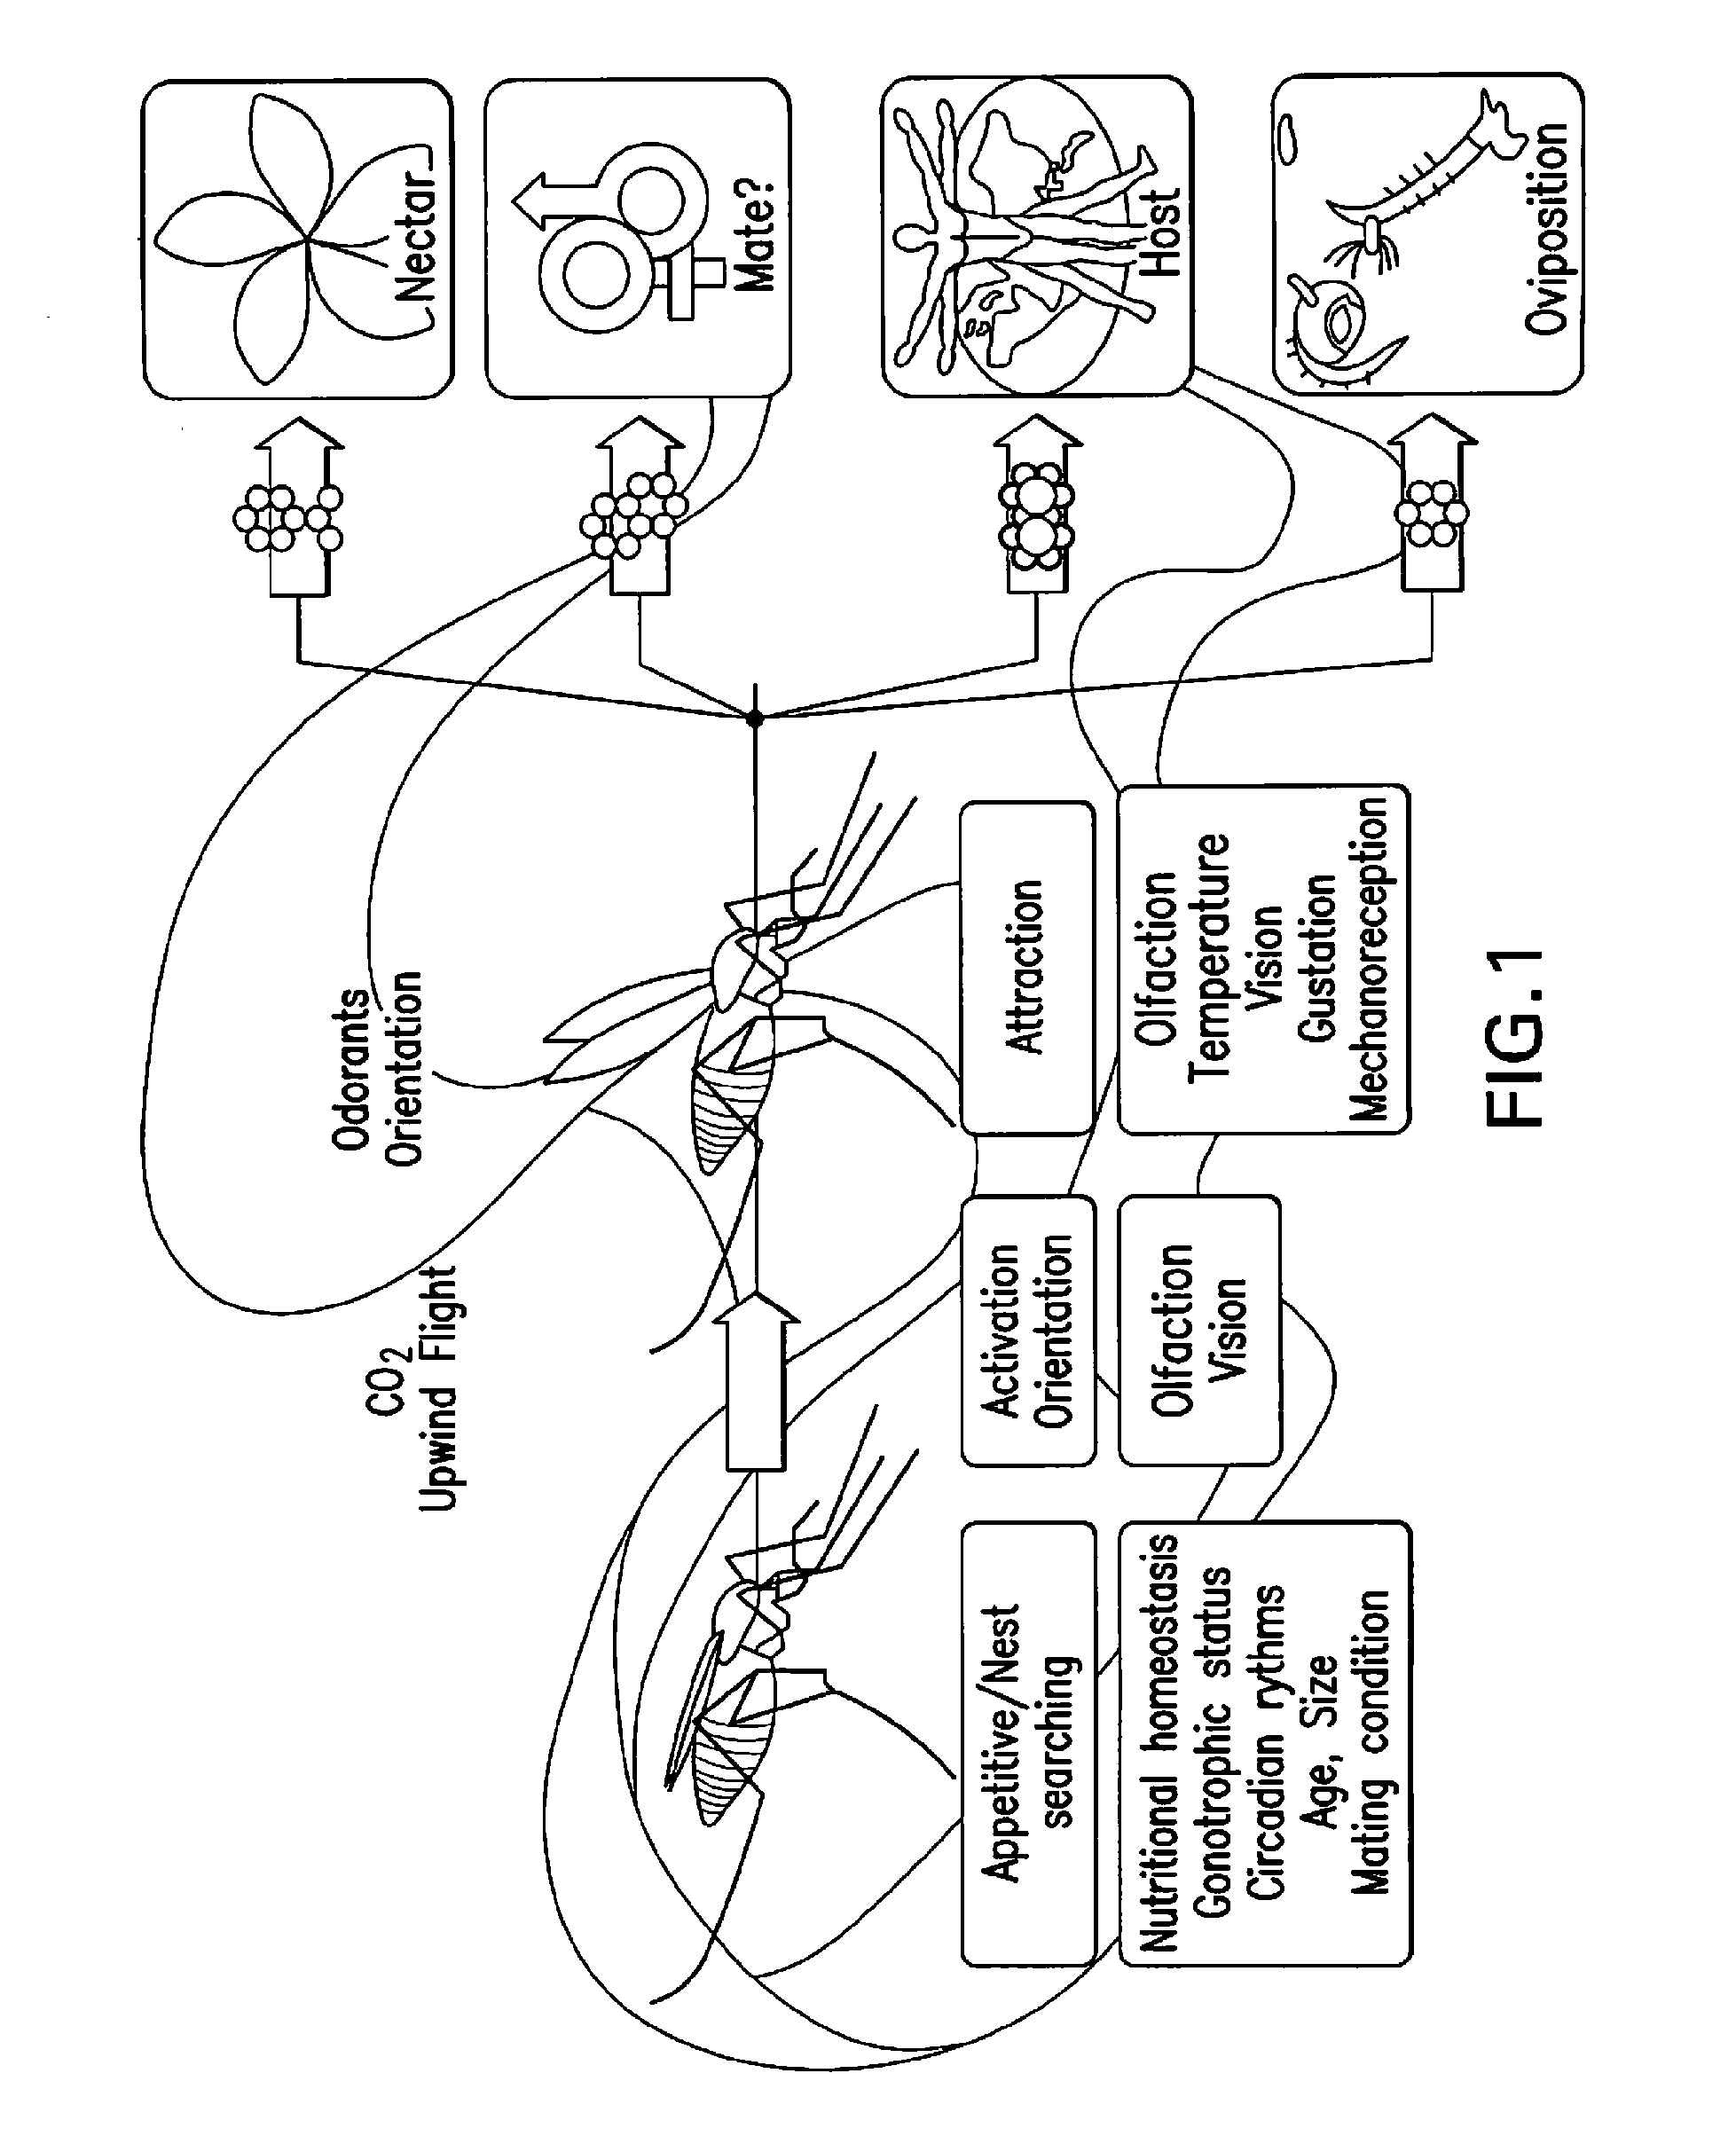 Composition for inhibition of insect host sensing